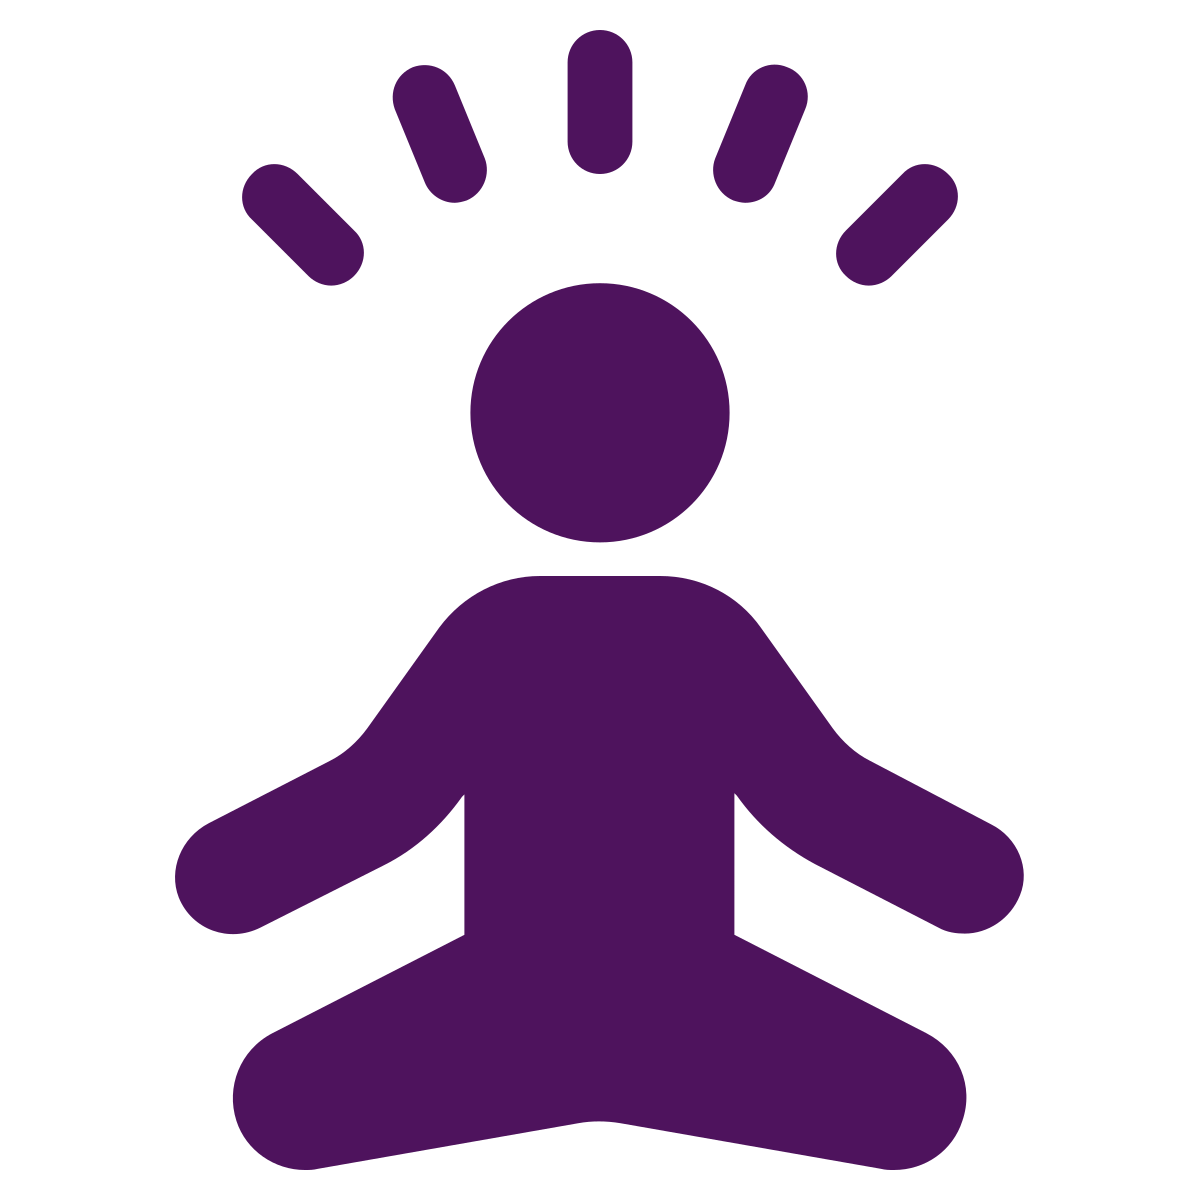 A purple person sitting in the middle of a circle.